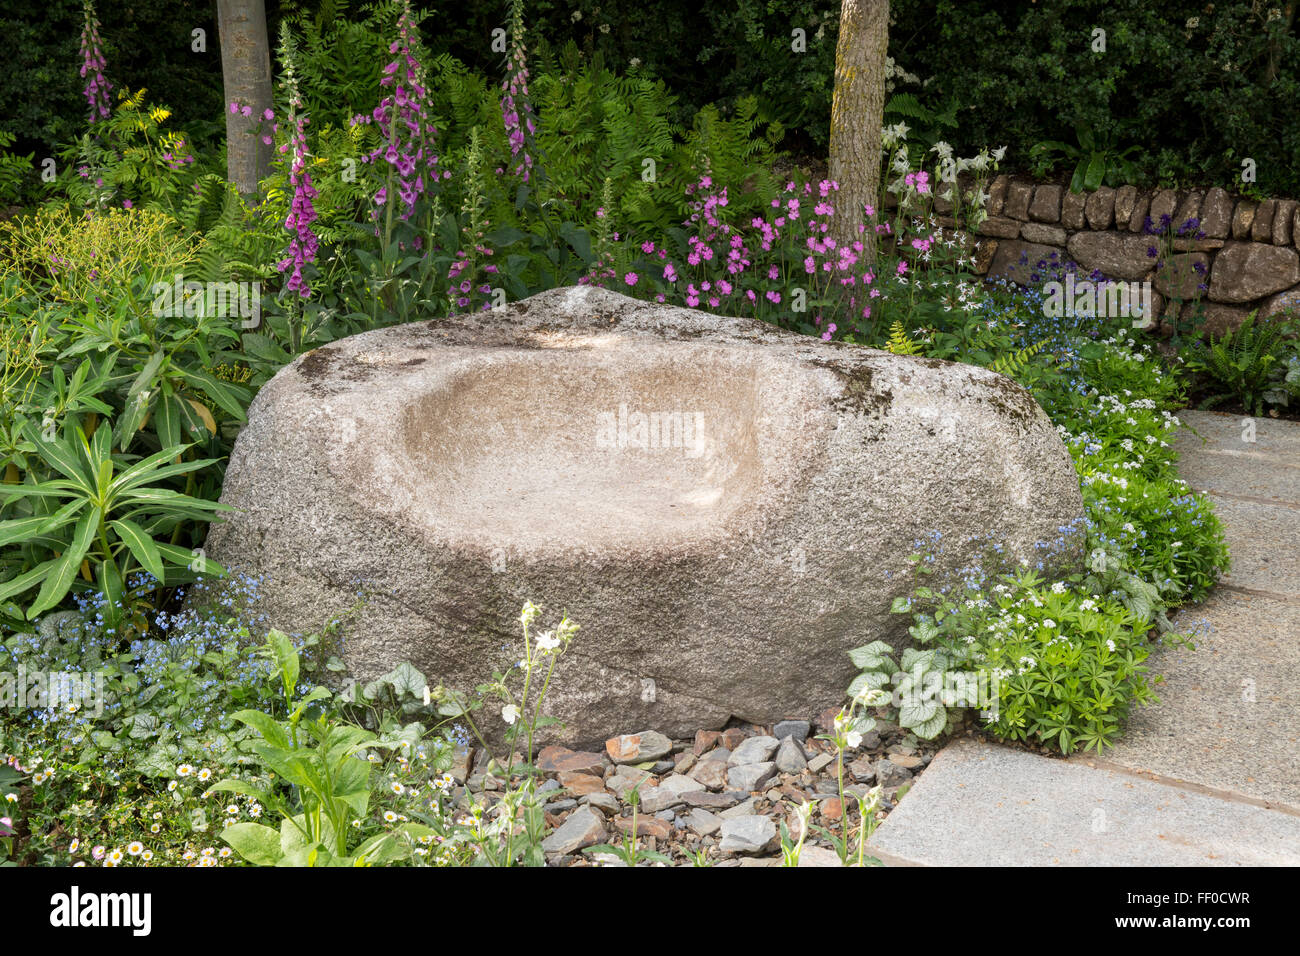 The Brewin Dolphin Garden - granite stone carved seats on patio area, dry stone wall, Darren Hawkes Stock Photo